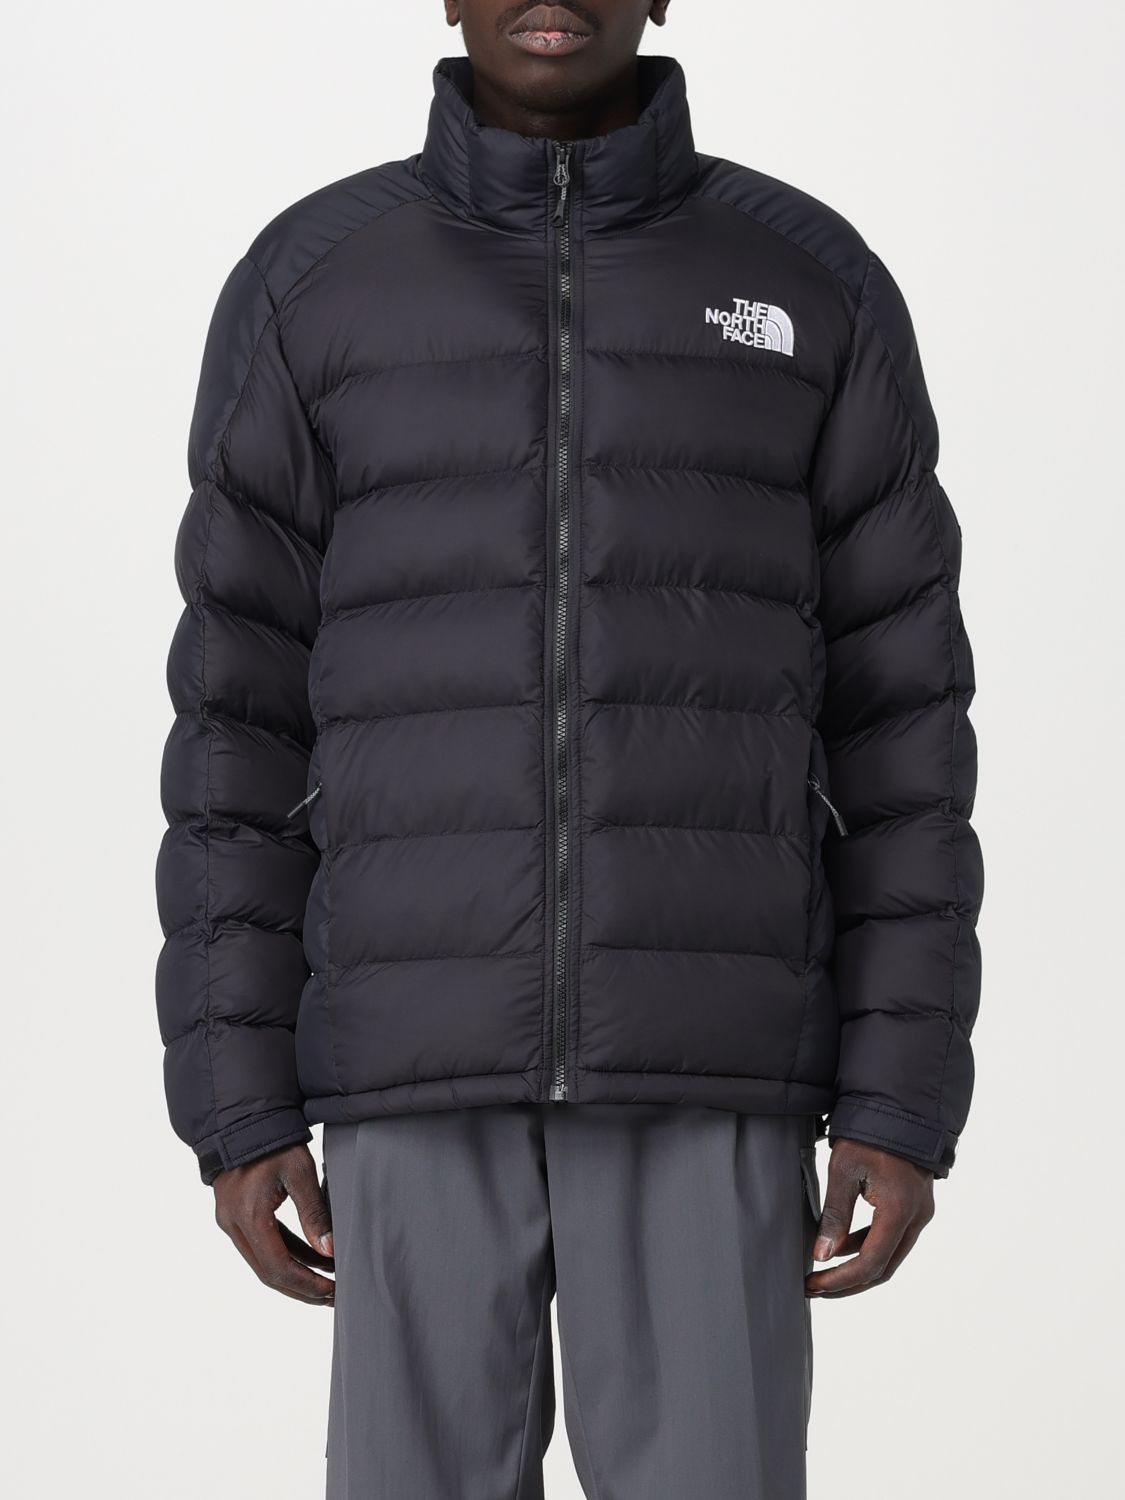 THE NORTH FACE JACKET THE NORTH FACE MEN COLOR BLACK,E99900002